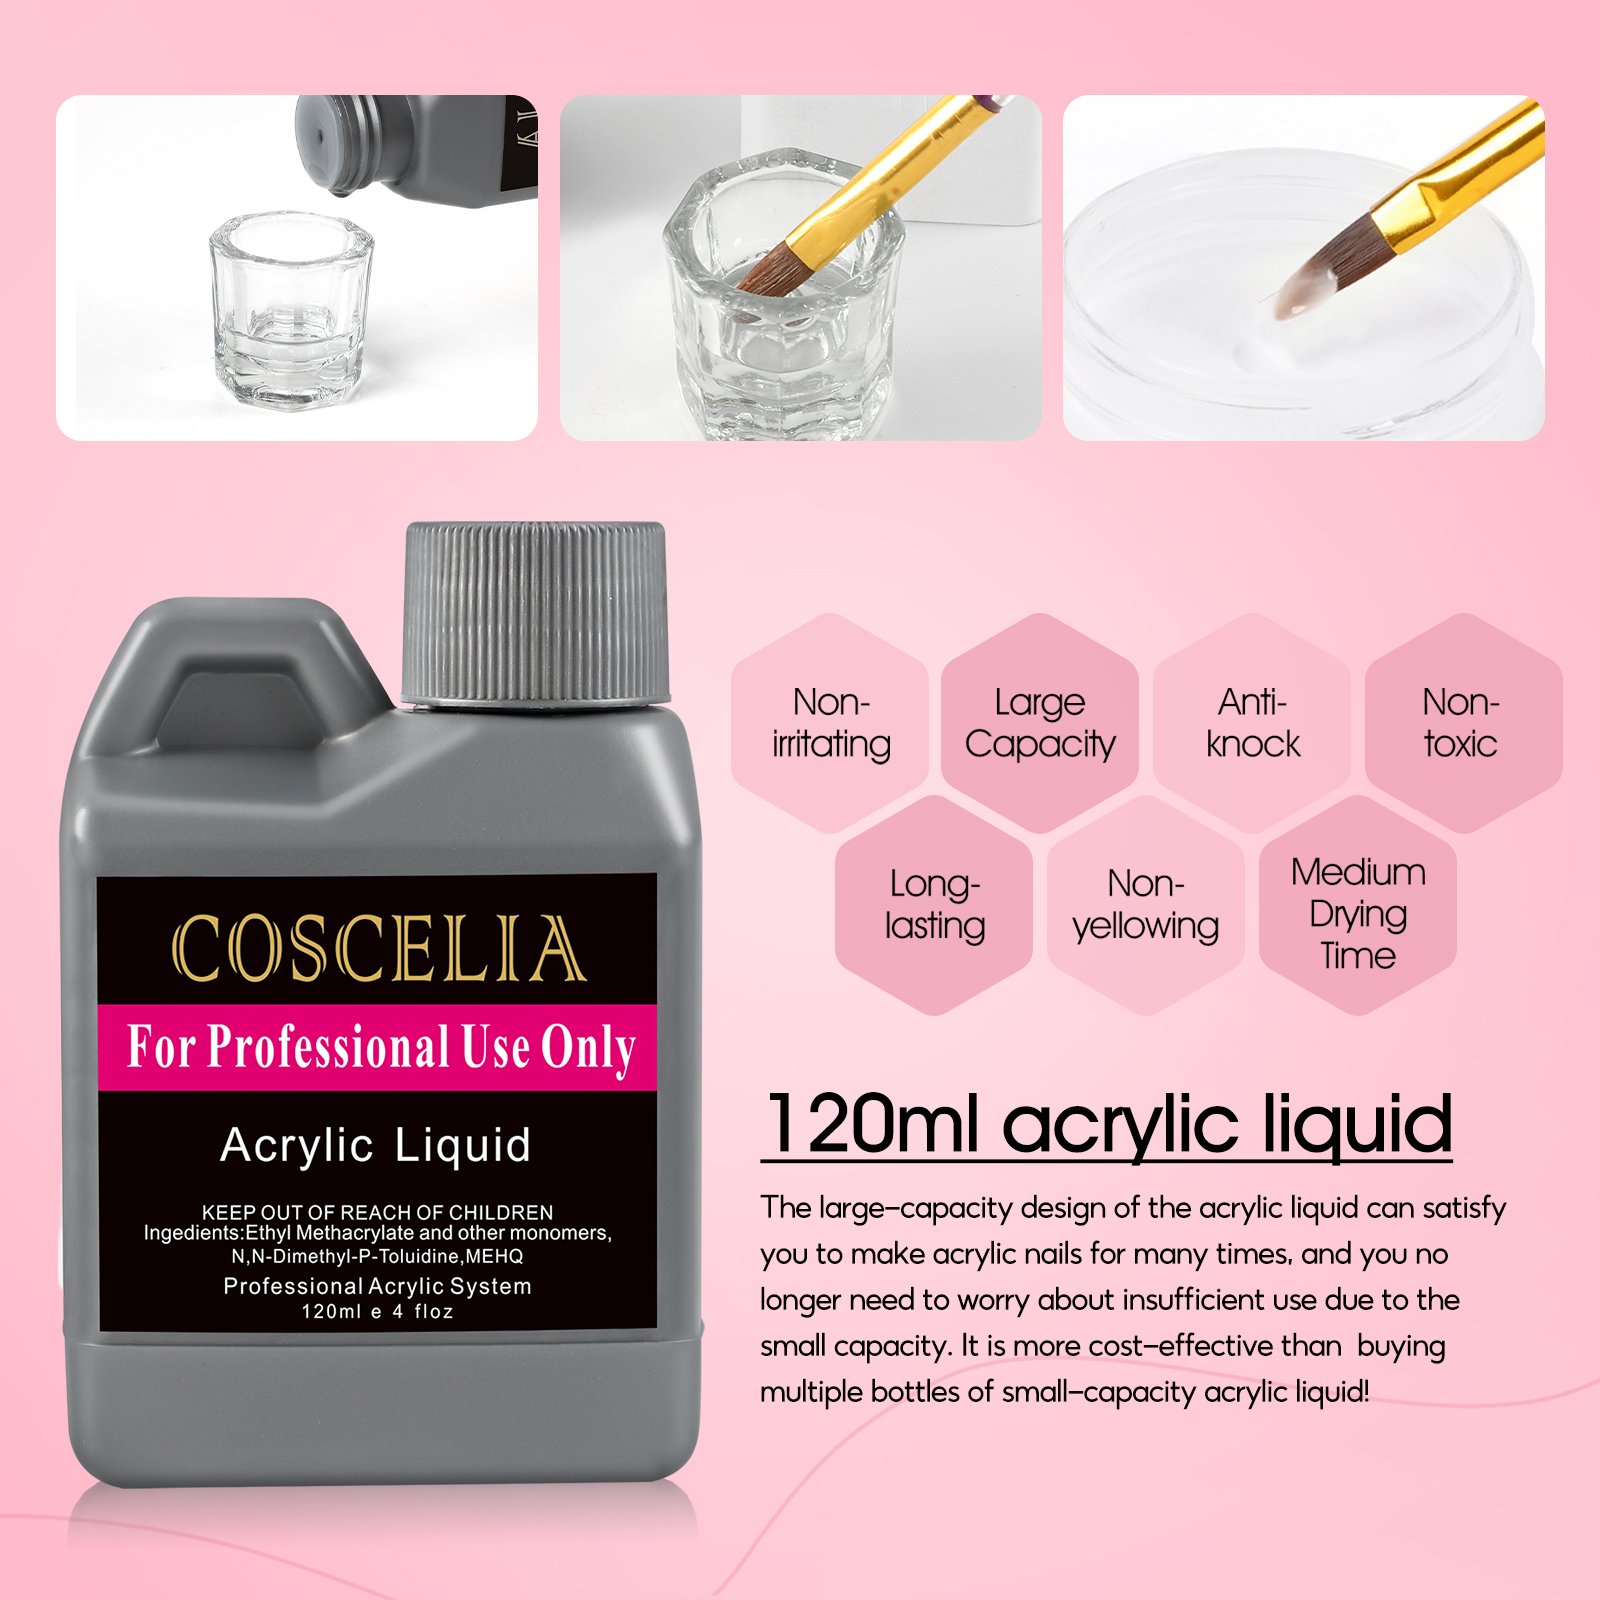 Coscelia Acrylic Nail Kit with Drill 15 Colors Glitter, Acrylic Liquid and Powder for Nail Extension - image 5 of 11